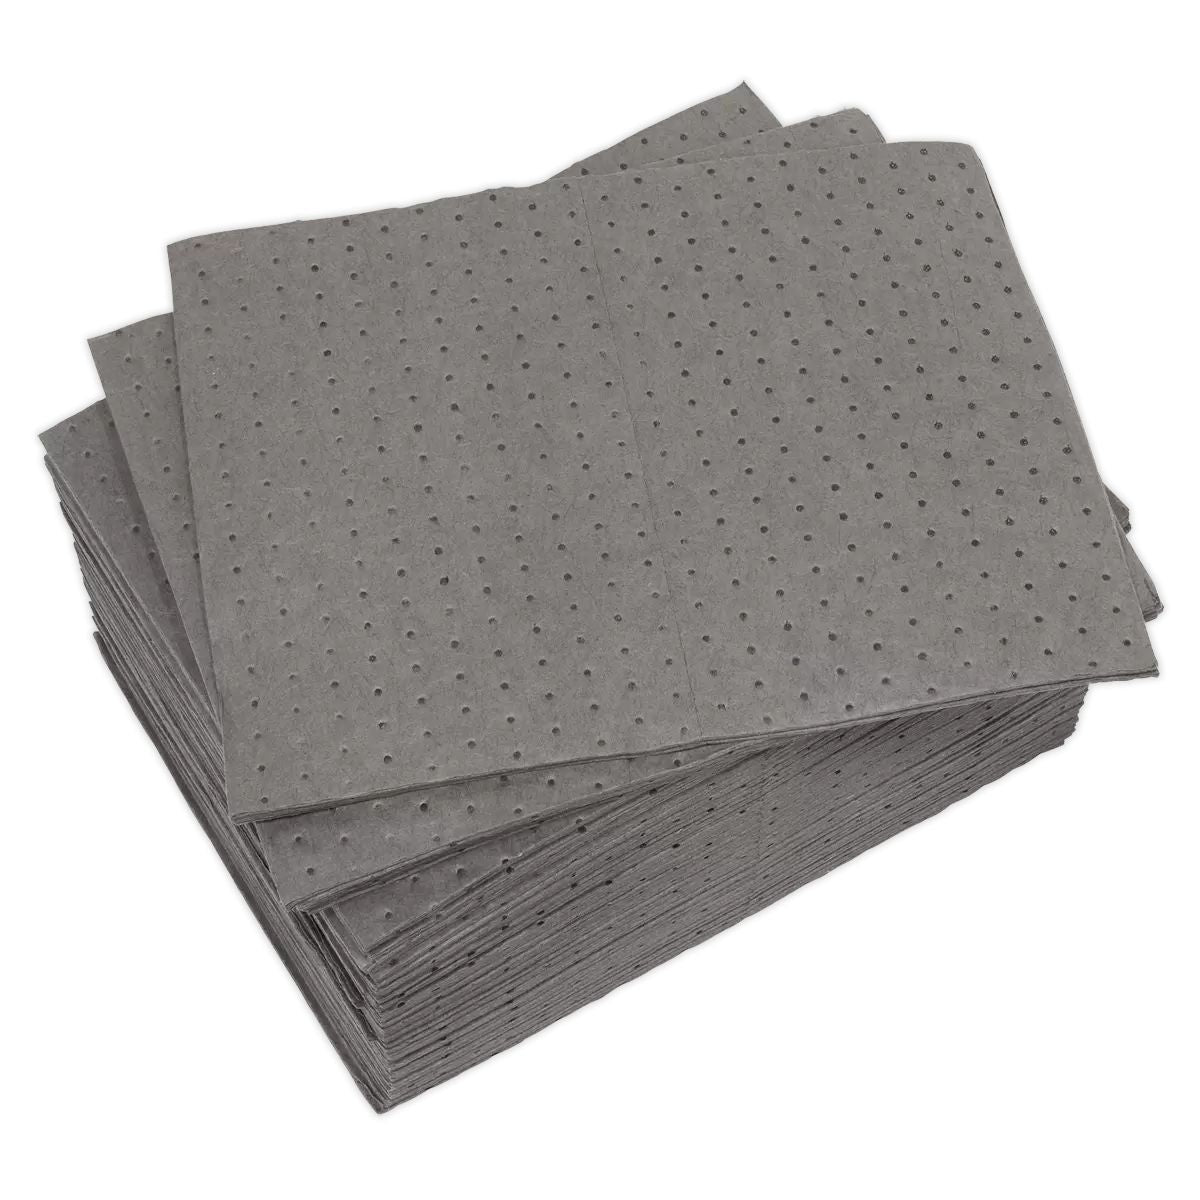 Sealey SAP01 Spill Absorbent Pad Pack of 100